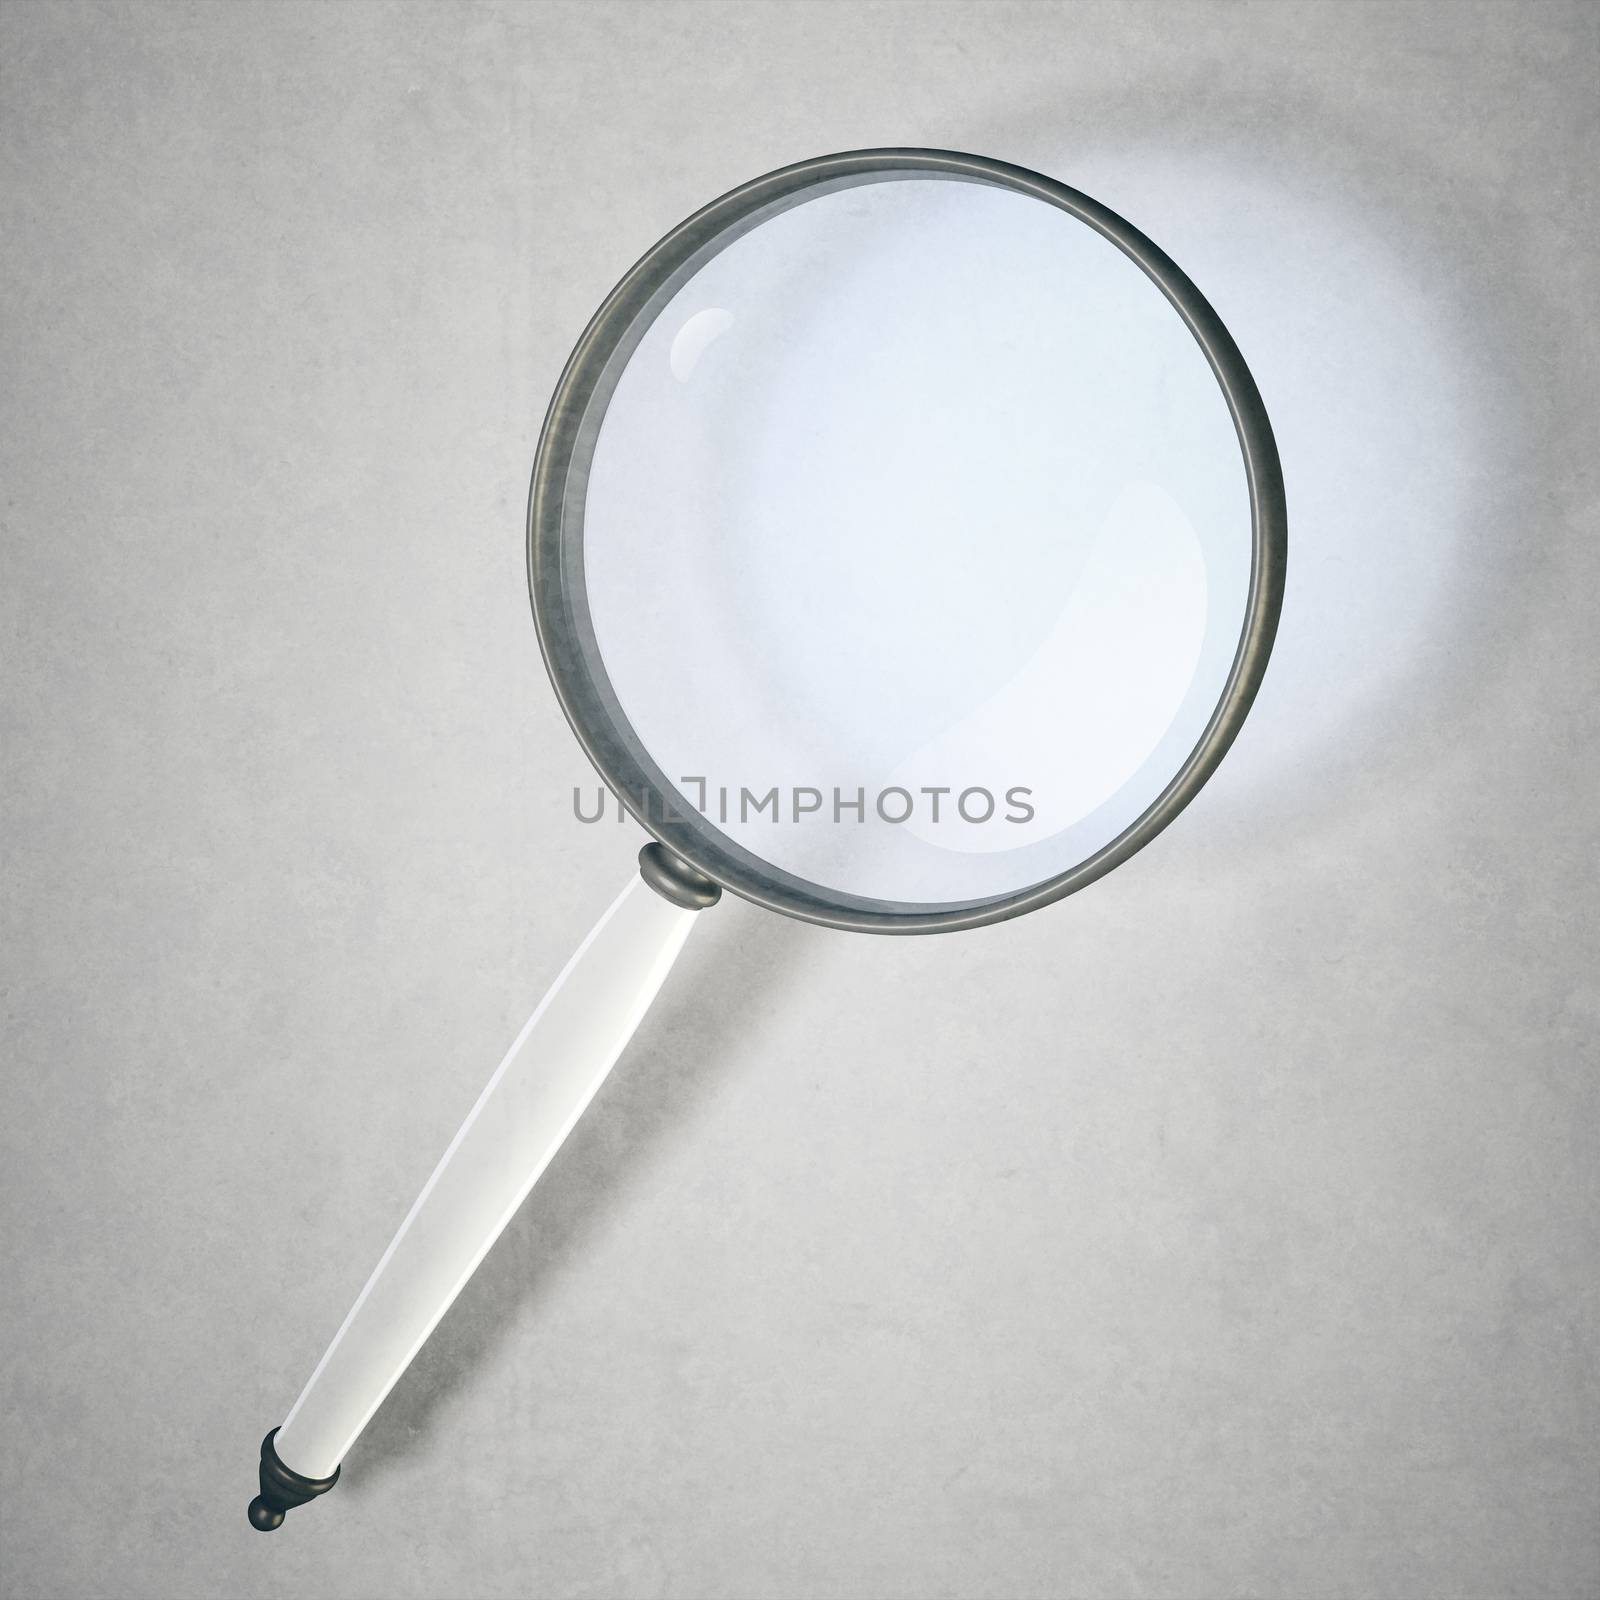 An image of a magnifying glass with space for your content